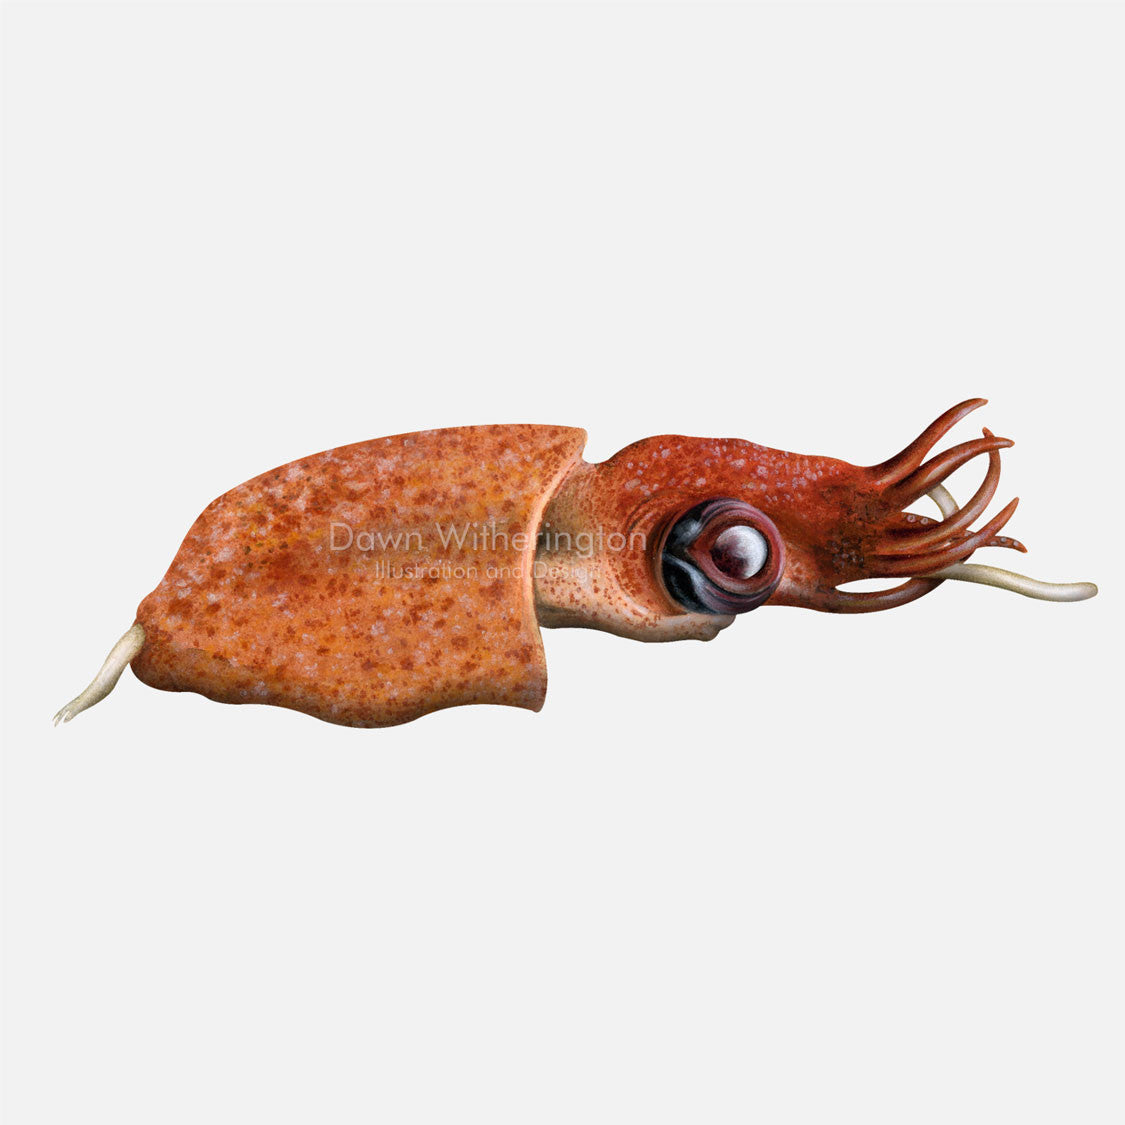 This beautiful drawing of a Deep sea squid is biologically accurate in detail.